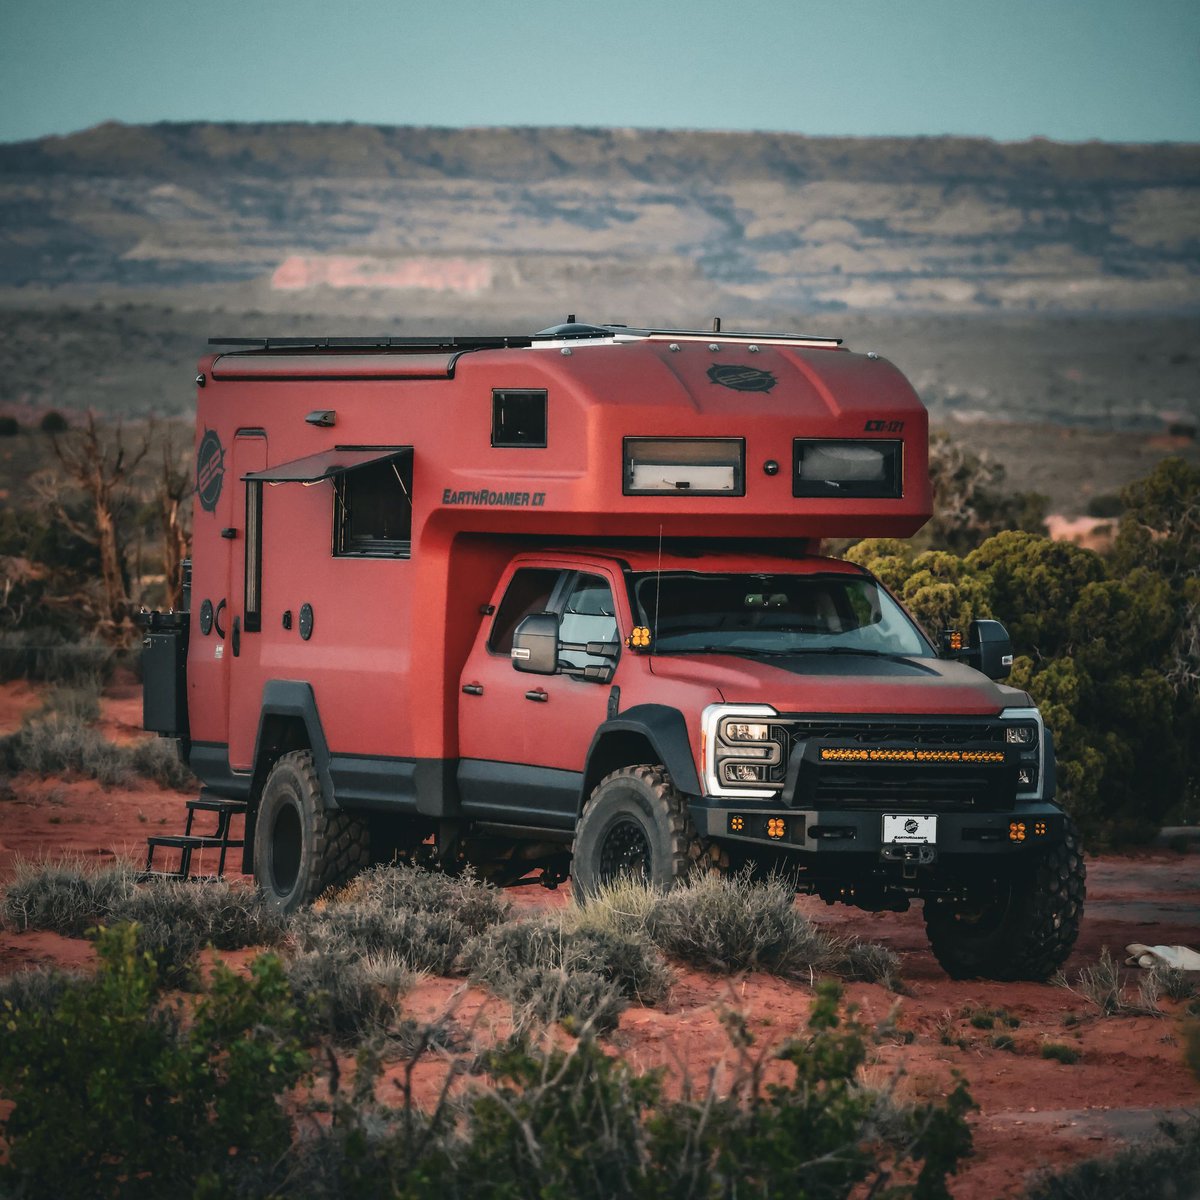 We've heard mixed reviews on the red. Let's settle the debate — would you choose this color? 🟥
·
·
·

#earthroamer  #offroad4x4 #expeditionvehicle #campinglife #overlanding #4x4life #4x4trucks #vanlife #vanlifeadventures